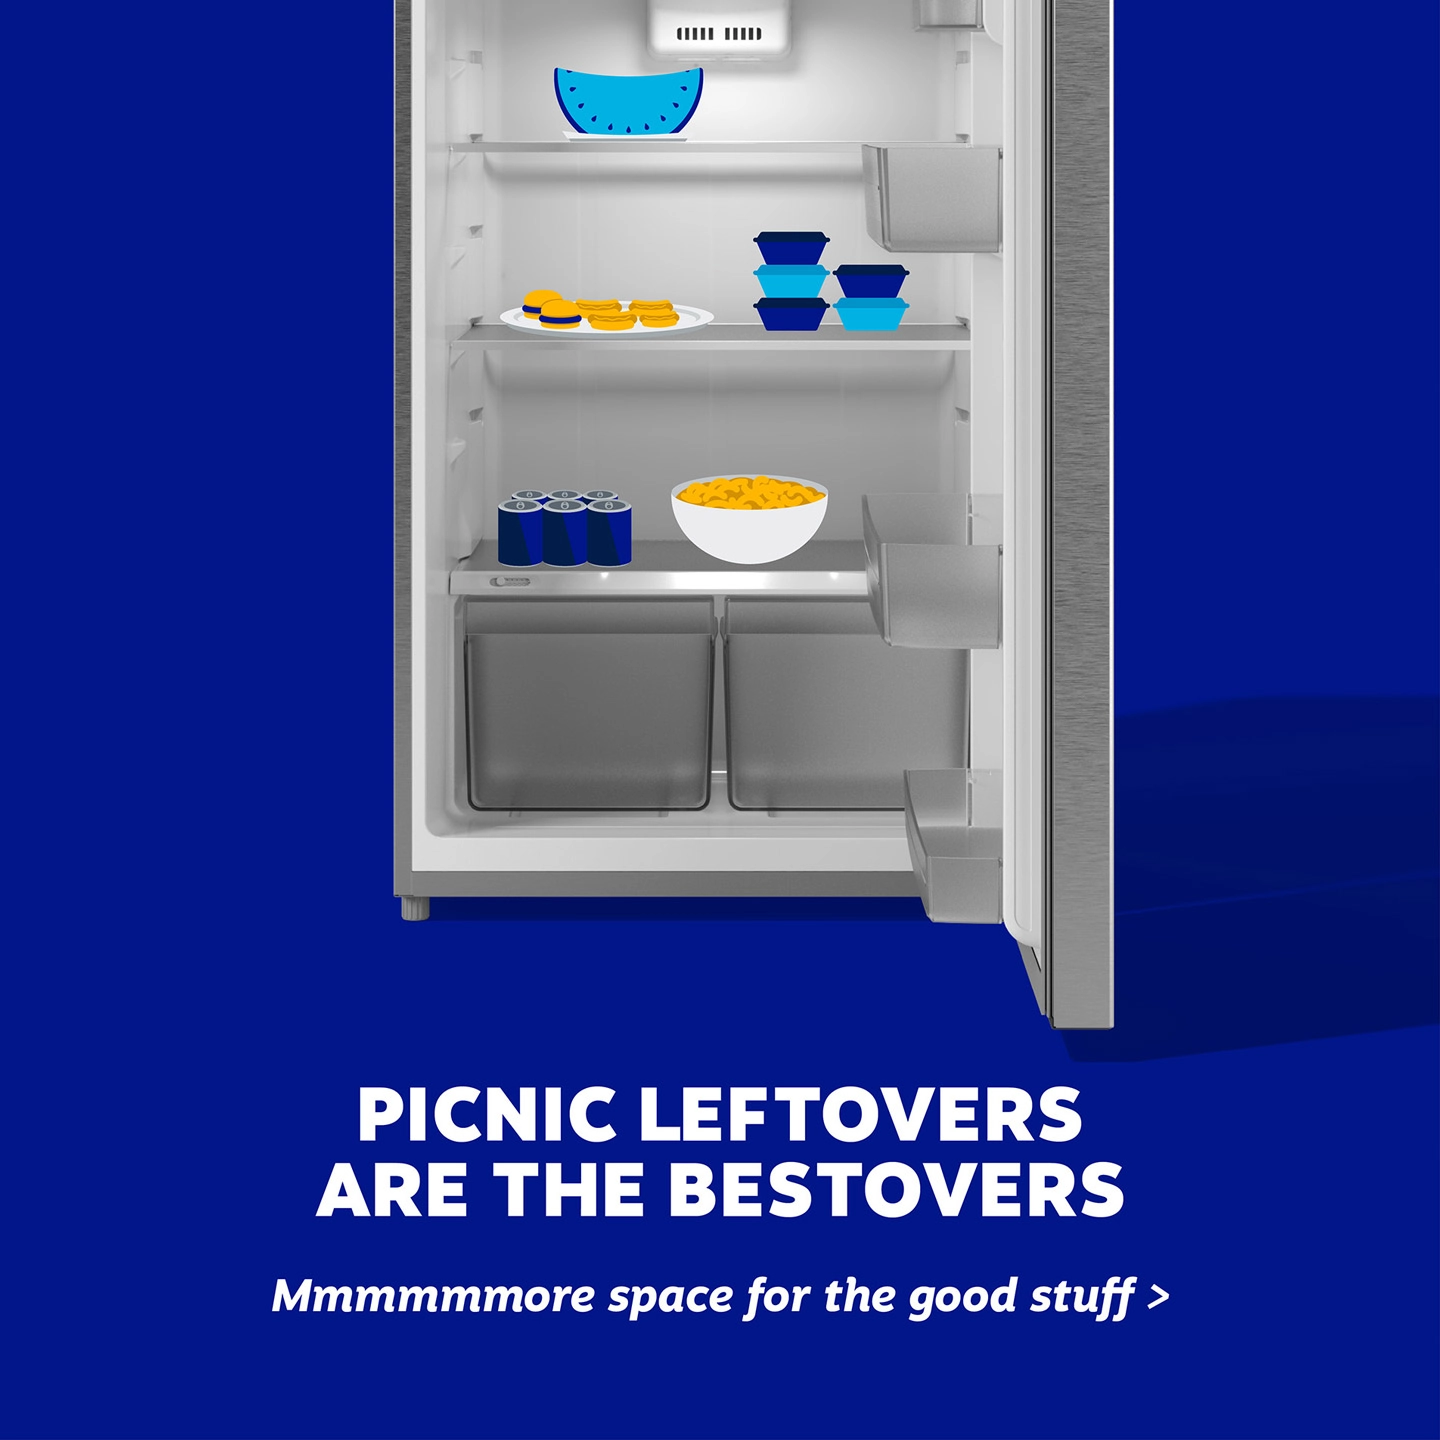 Picnic leftovers are the best-overs - shop Element refrigerators